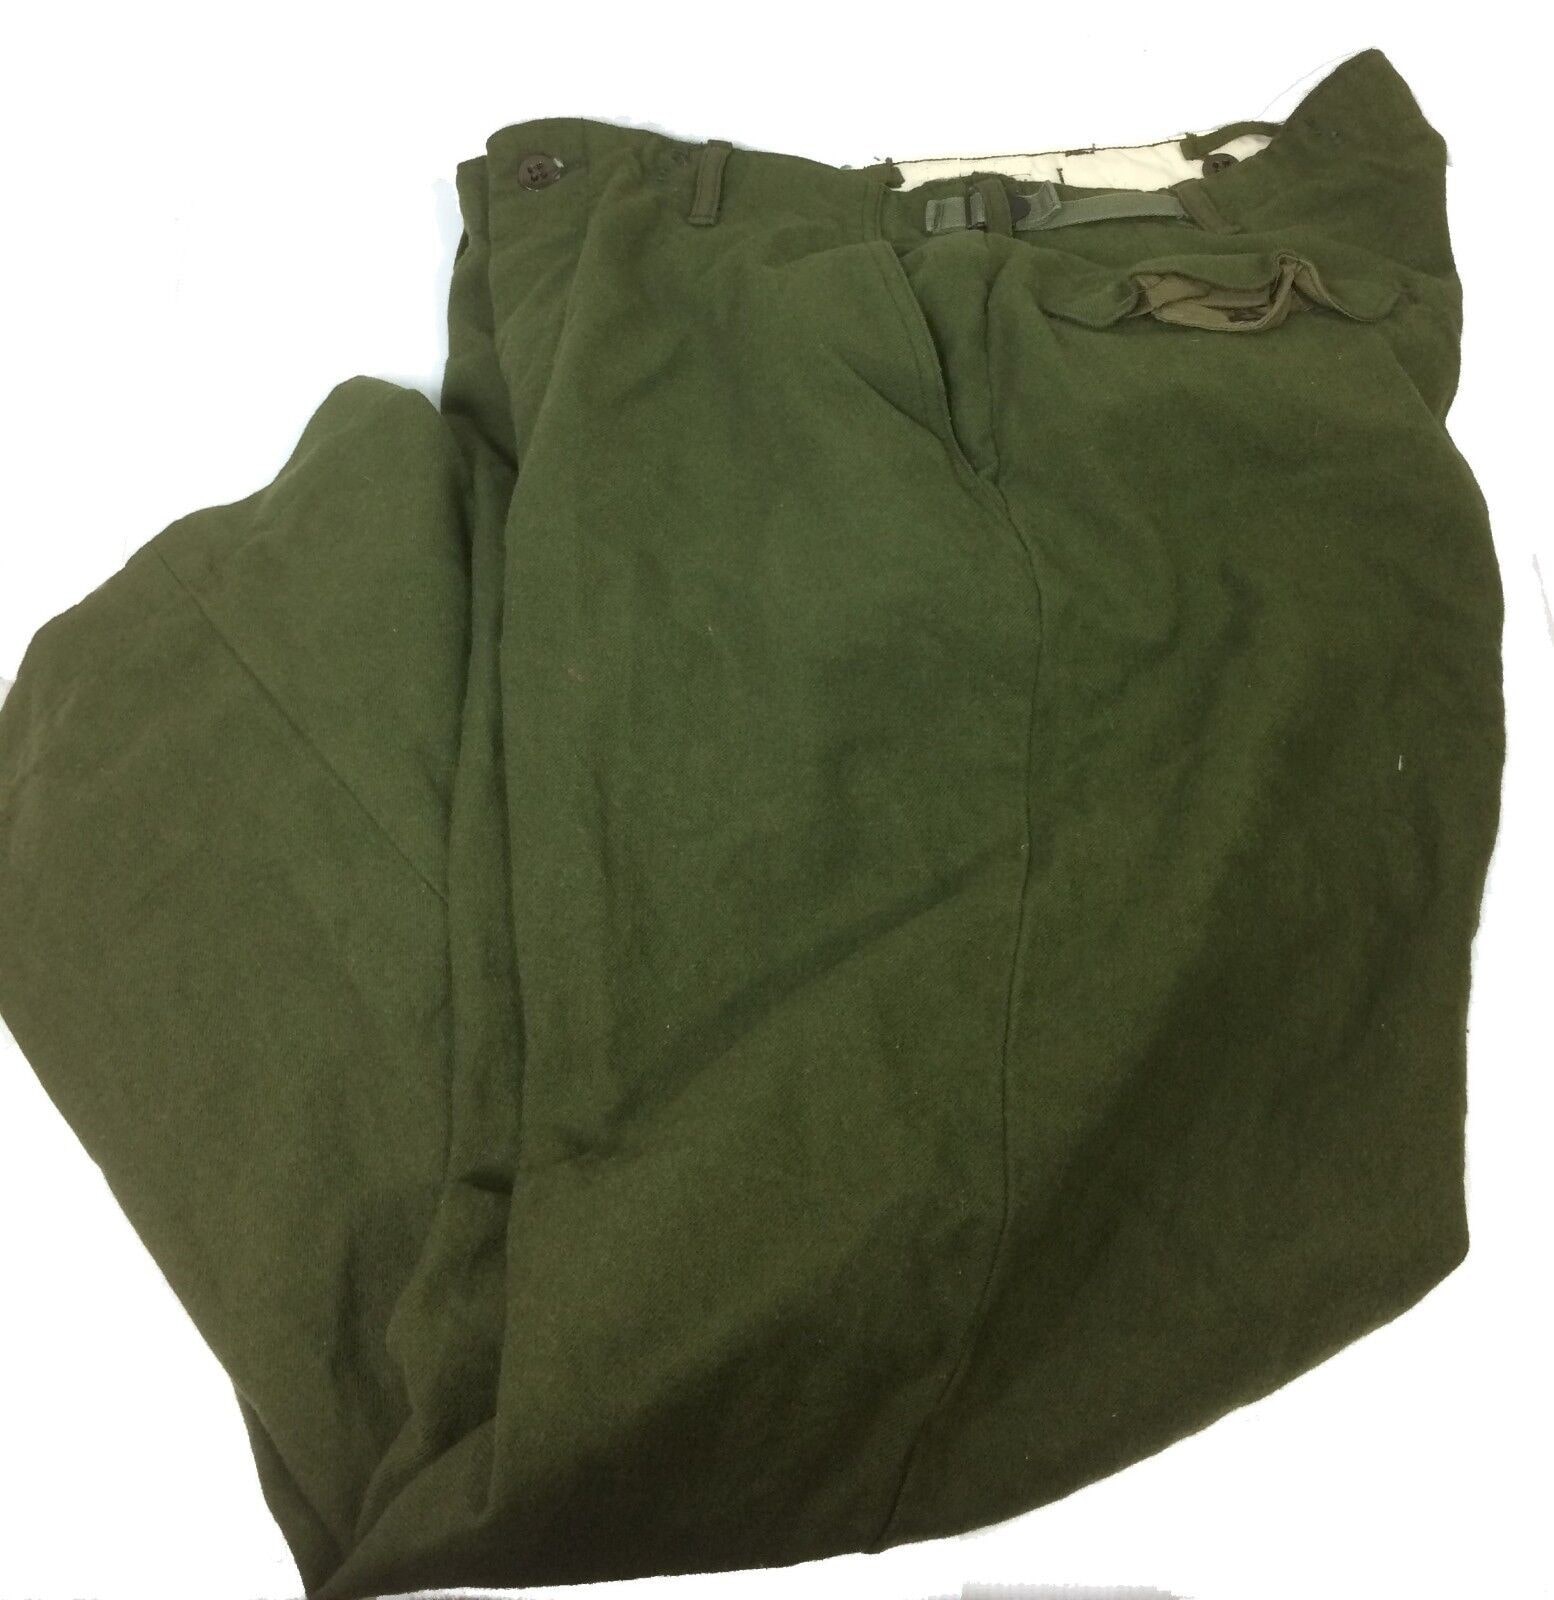 Field Pants  Pants  Used Clothing  Military Surplus militarysurpluseu   Army Navy Surplus  Tactical  Big variety  Cheap prices  Military Surplus  Clothing Law Enforcement Boots Outdoor  Tactical Gear